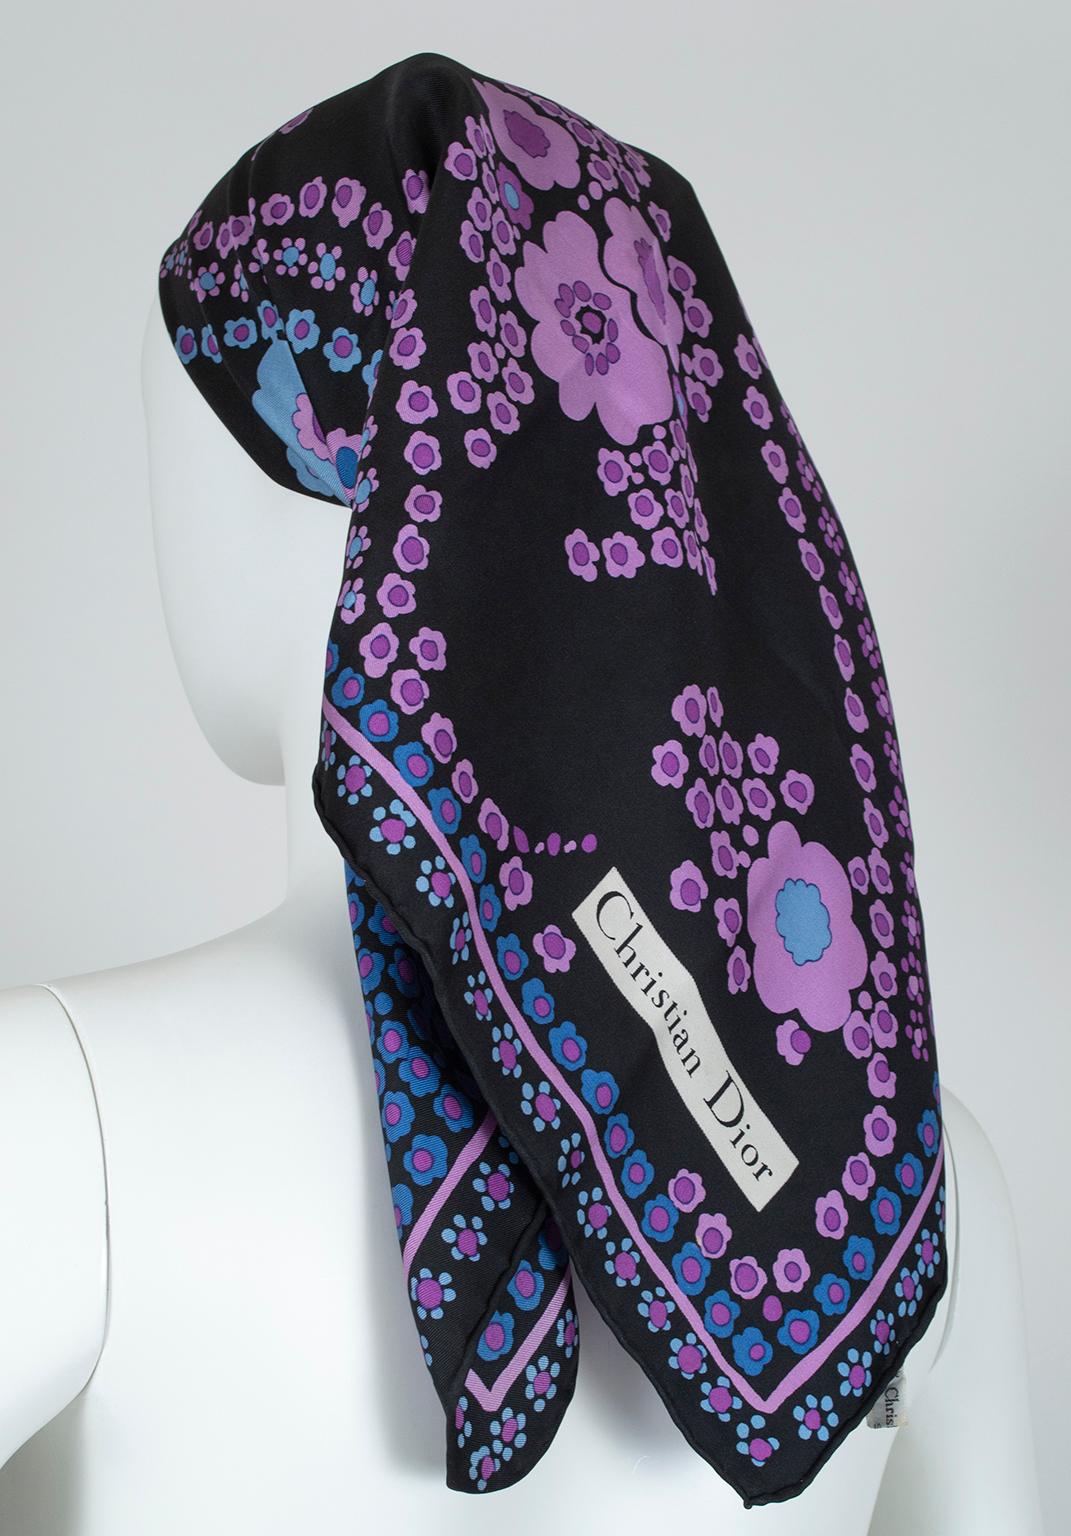 Saturated tones of purple, blue and black embellish this oversized square scarf, large enough to wear around the shoulders, in the hair or on your handbag. Pretty enough to frame!

Single-ply silk twill scarf with rolled edges. Square format